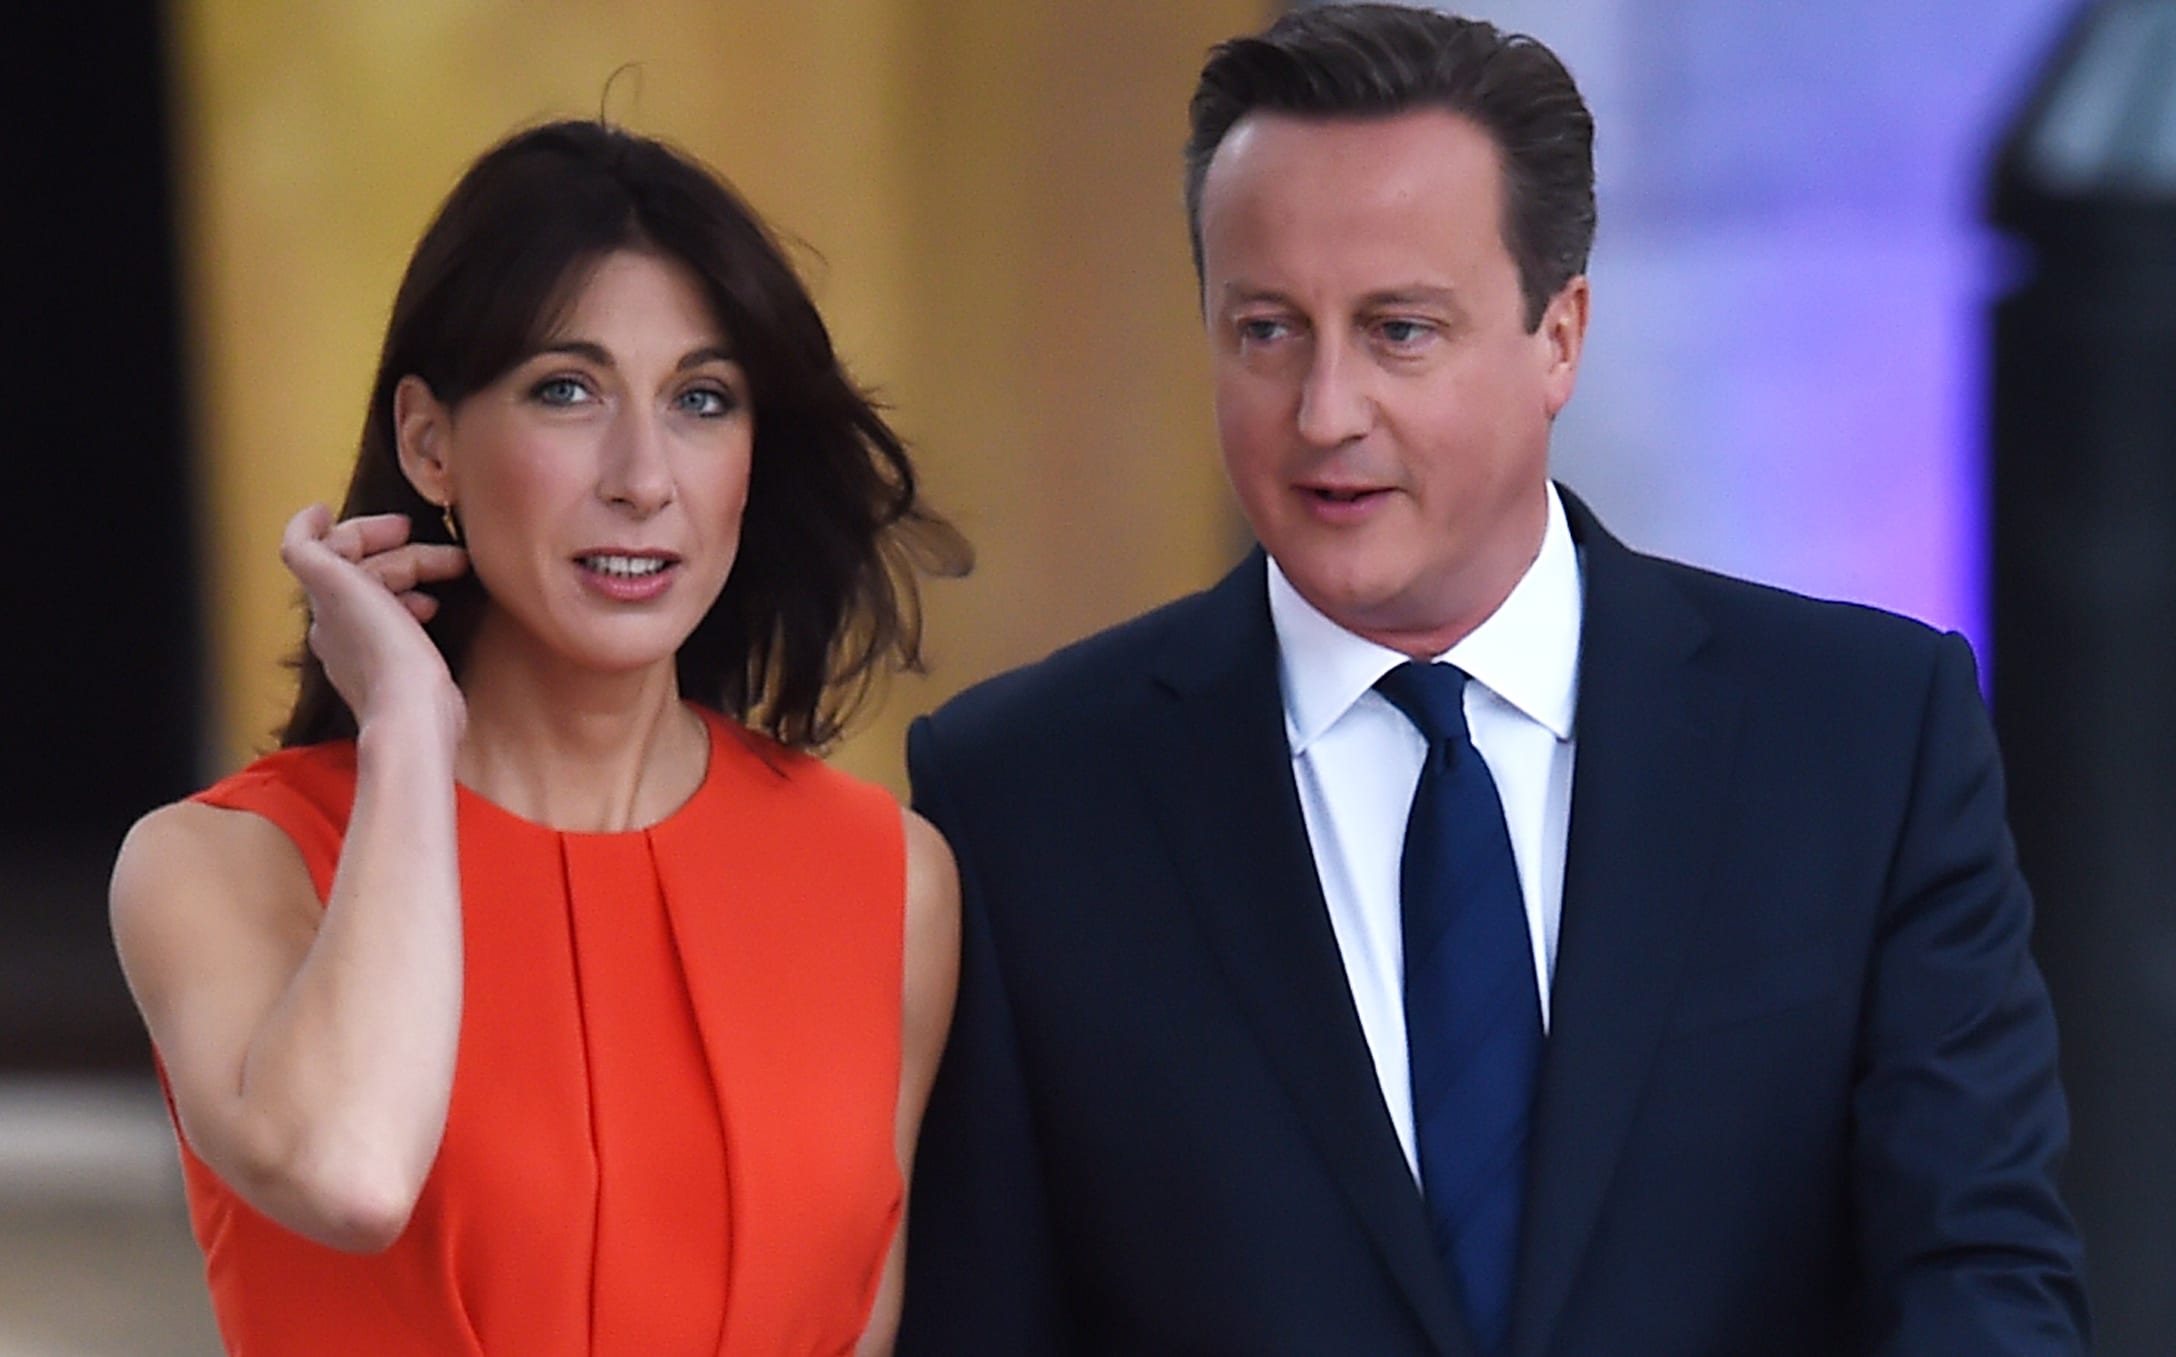 UK Prime Minister David Cameron, right, and his wife Samantha Cameron